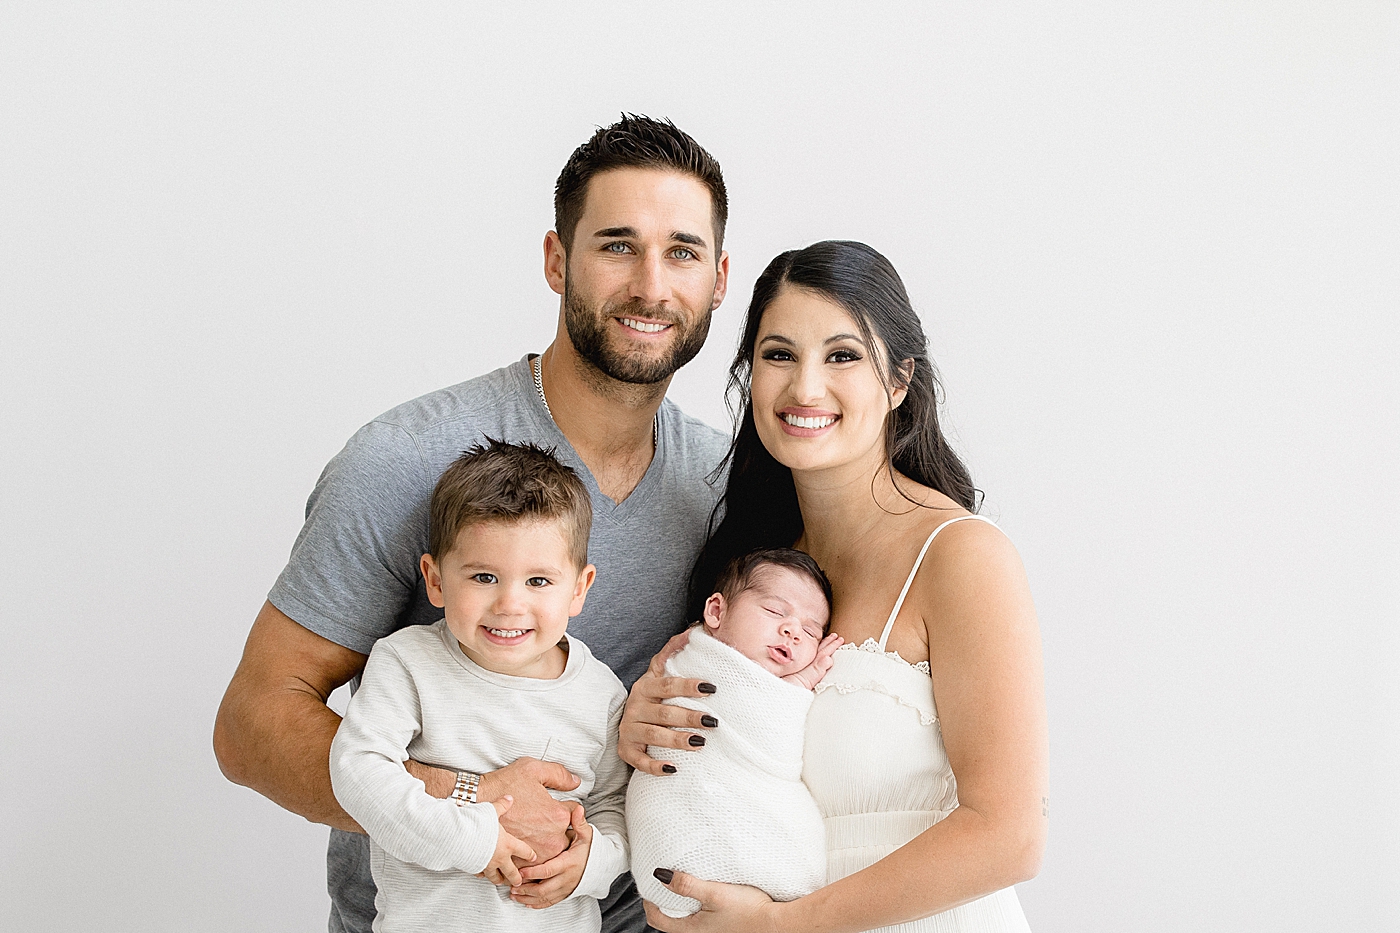 Kiermaier family welcomes baby boy, Krew. Photo by Brittany Elise Photography.